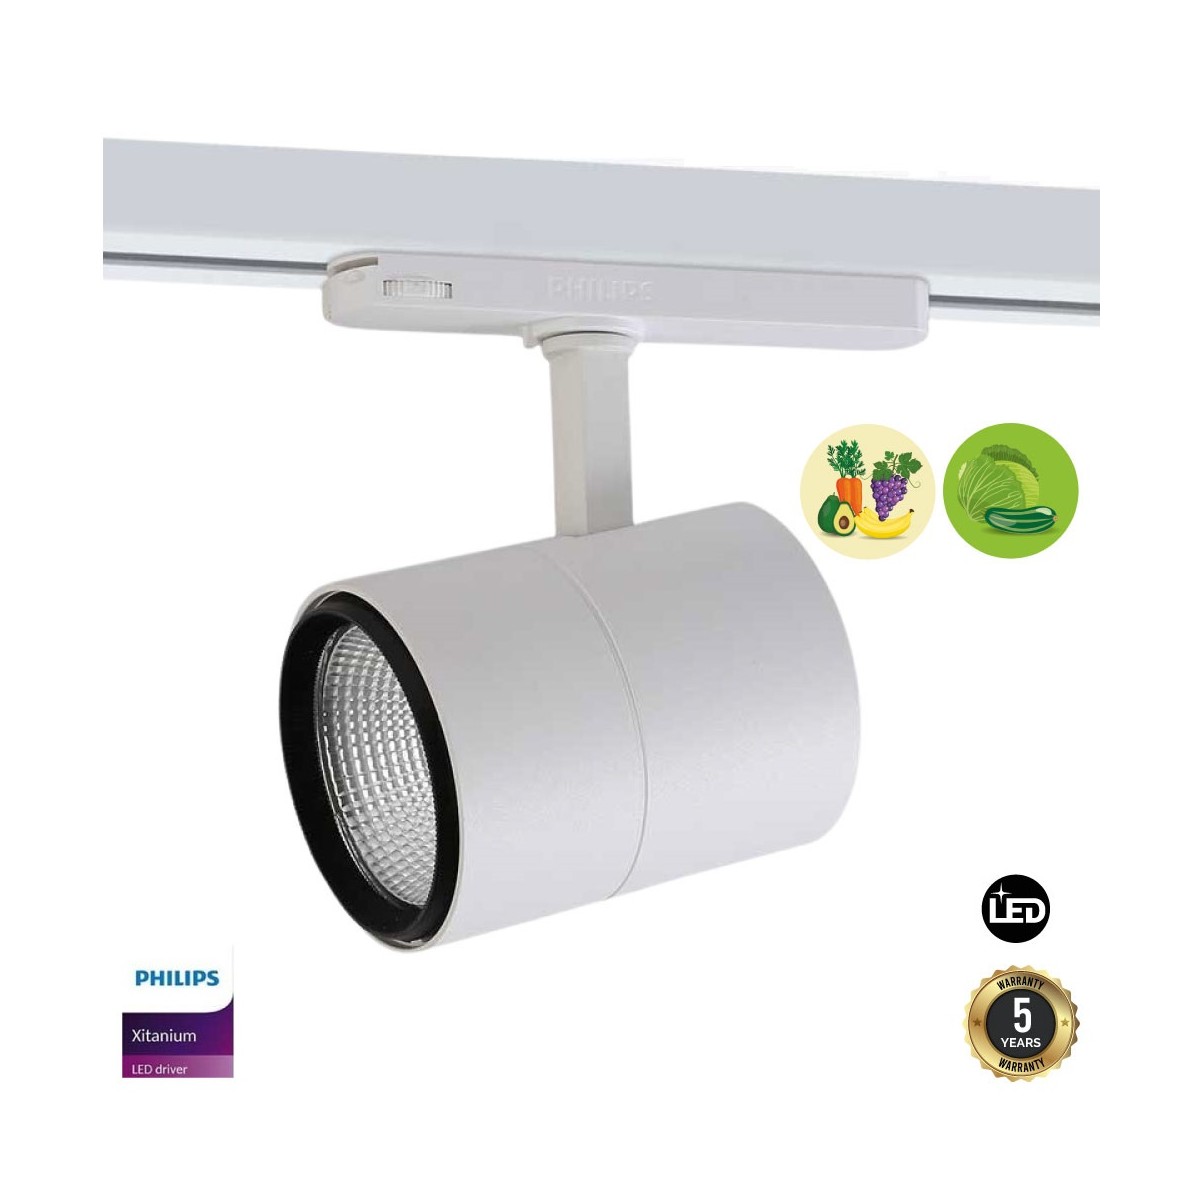 Special three-phase 30W LED spotlight for greengrocers and fruit and vegetable shops